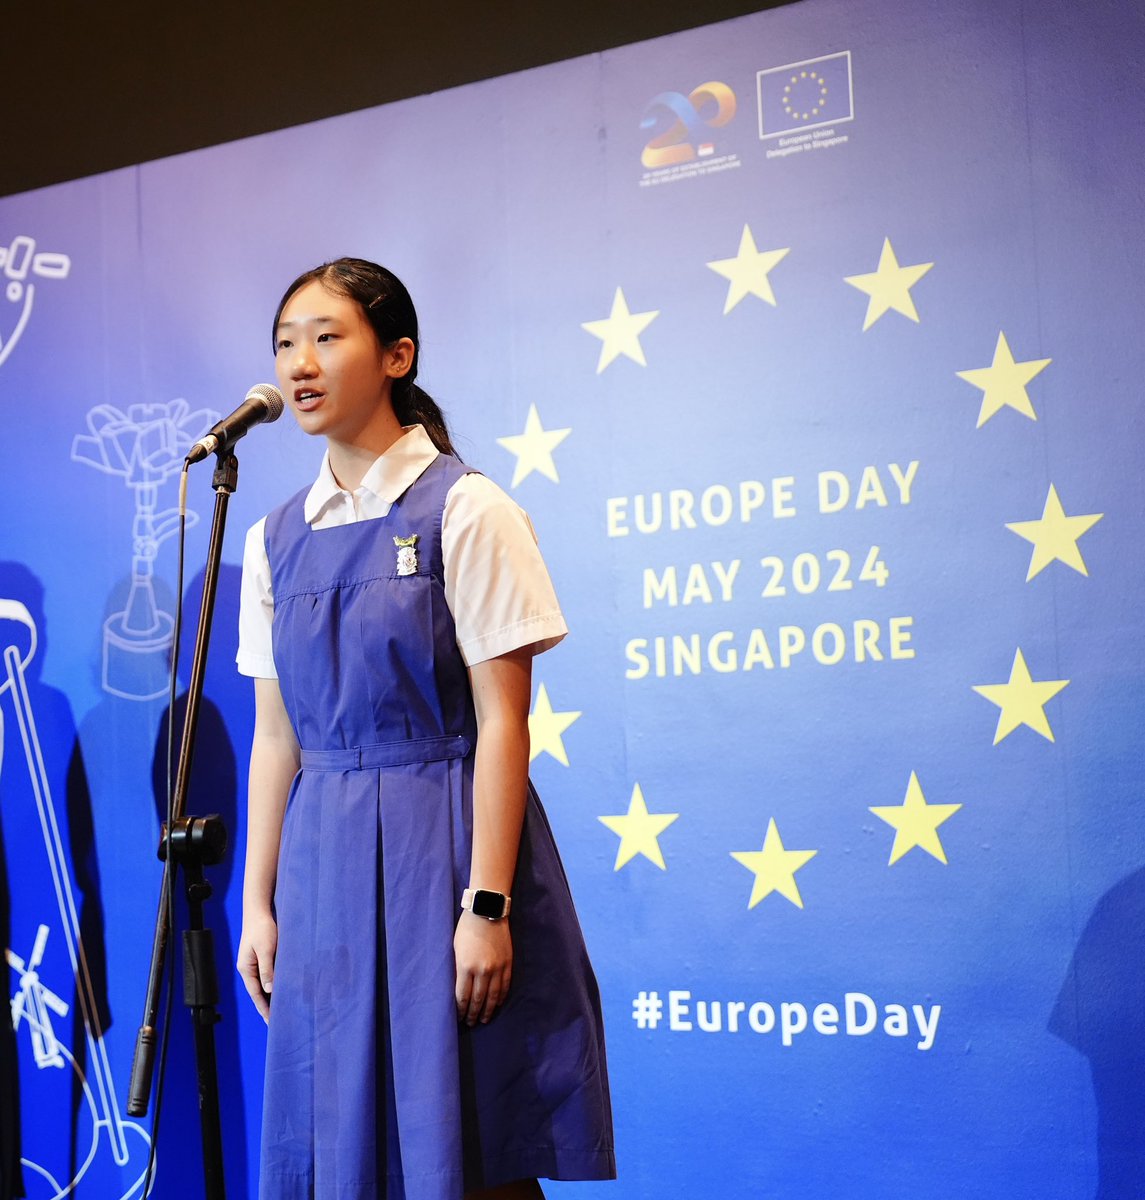 Today #TeamEurope in Singapore celebrates #EuropeDay2024 🇪🇺🇸🇬 Delighted to welcome Minister Chee Hong Tat as Guest of Honour. Thank you to our partners and sponsors & all friends of Europe for joining us this evening. #EUDiplomacy